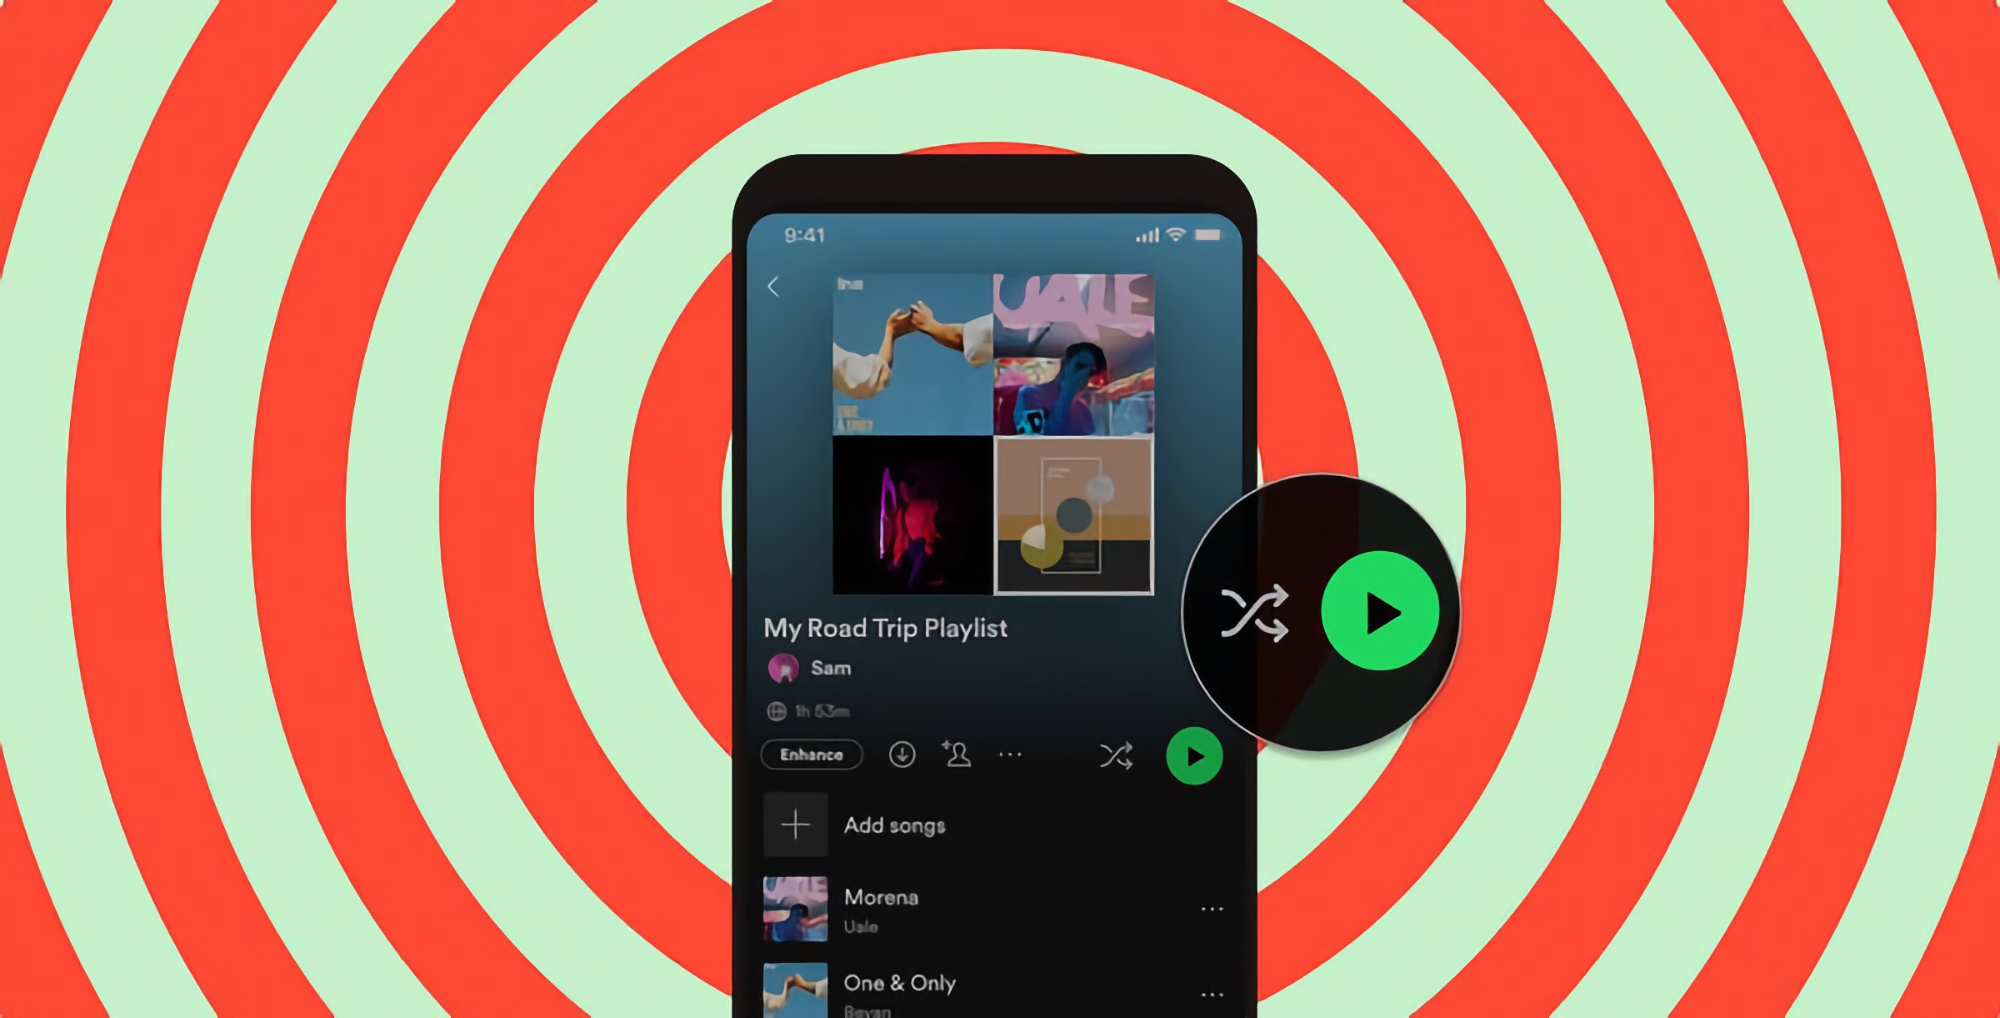 Spotify will separate "Play" and "Shuffle" buttons for Premium users